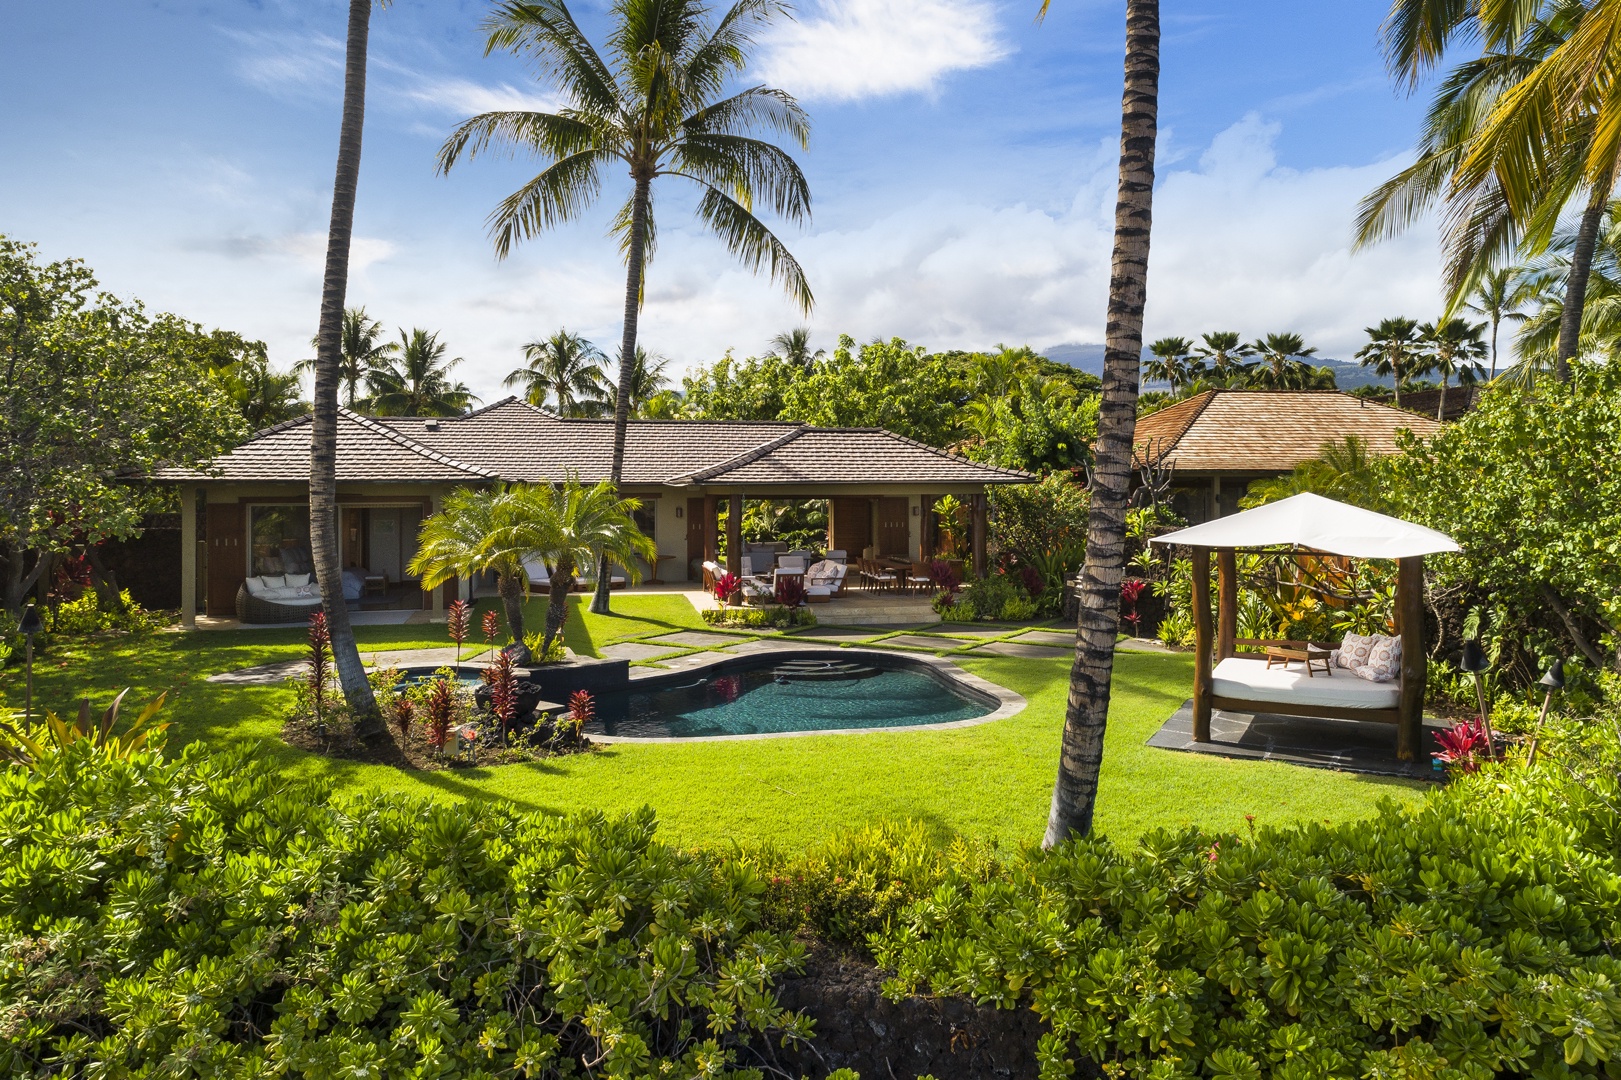 Kailua Kona Vacation Rentals, 4BD Kahikole Street (218) Estate Home at Four Seasons Resort at Hualalai - Spacious backyard with private pool, spa, covered daybed & luscious lawn